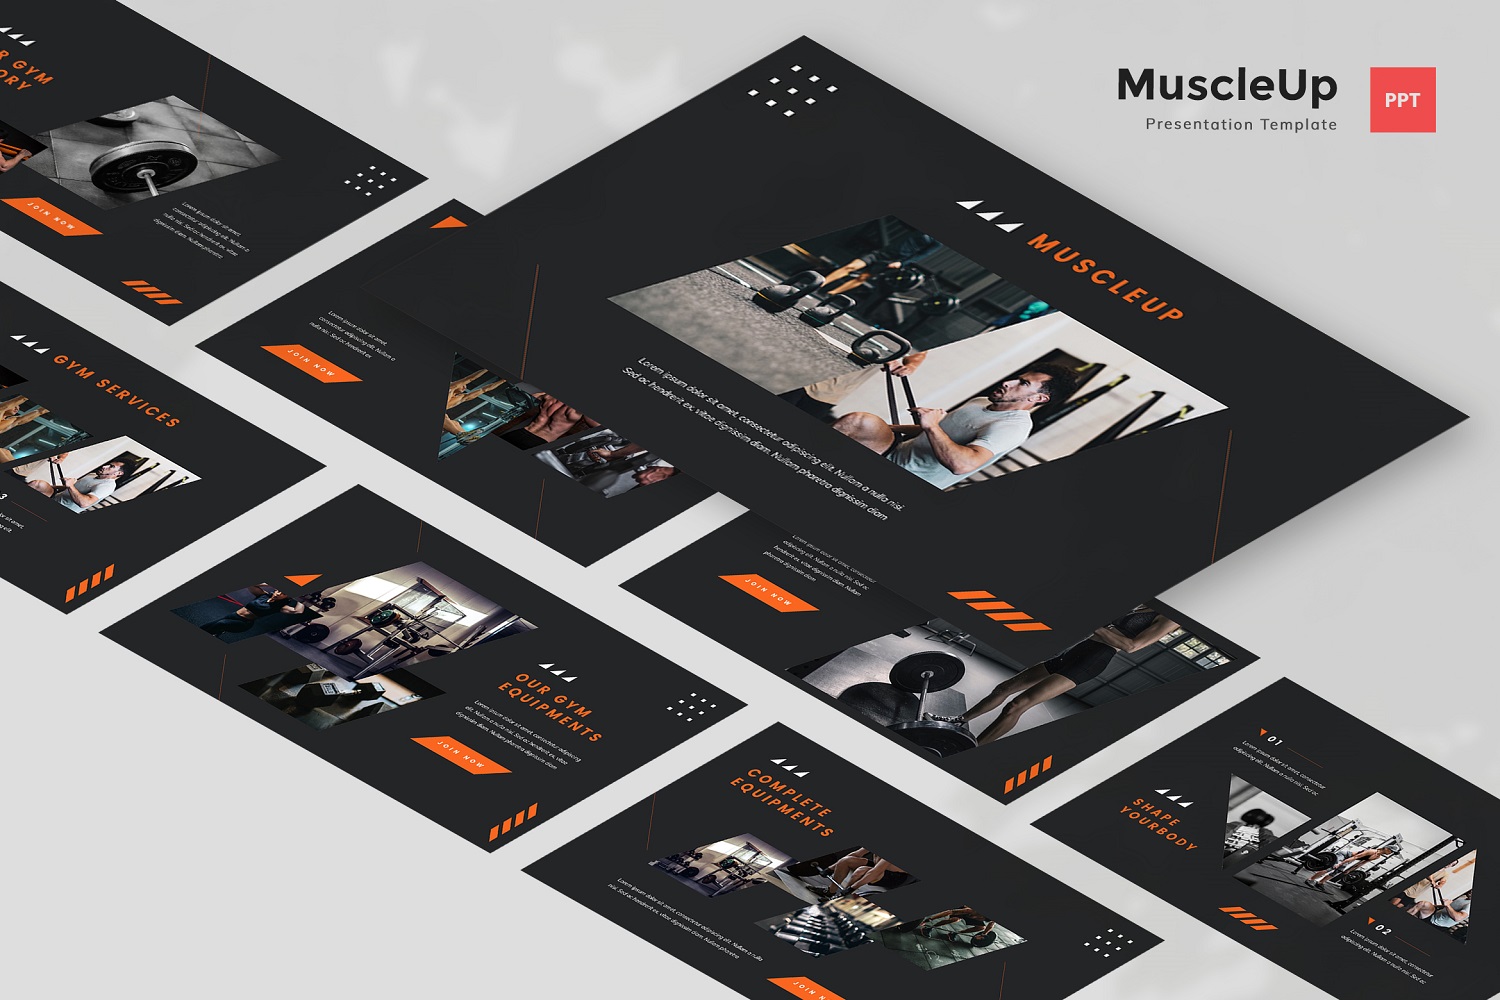 MuscleUp - Gym Powerpoint Template